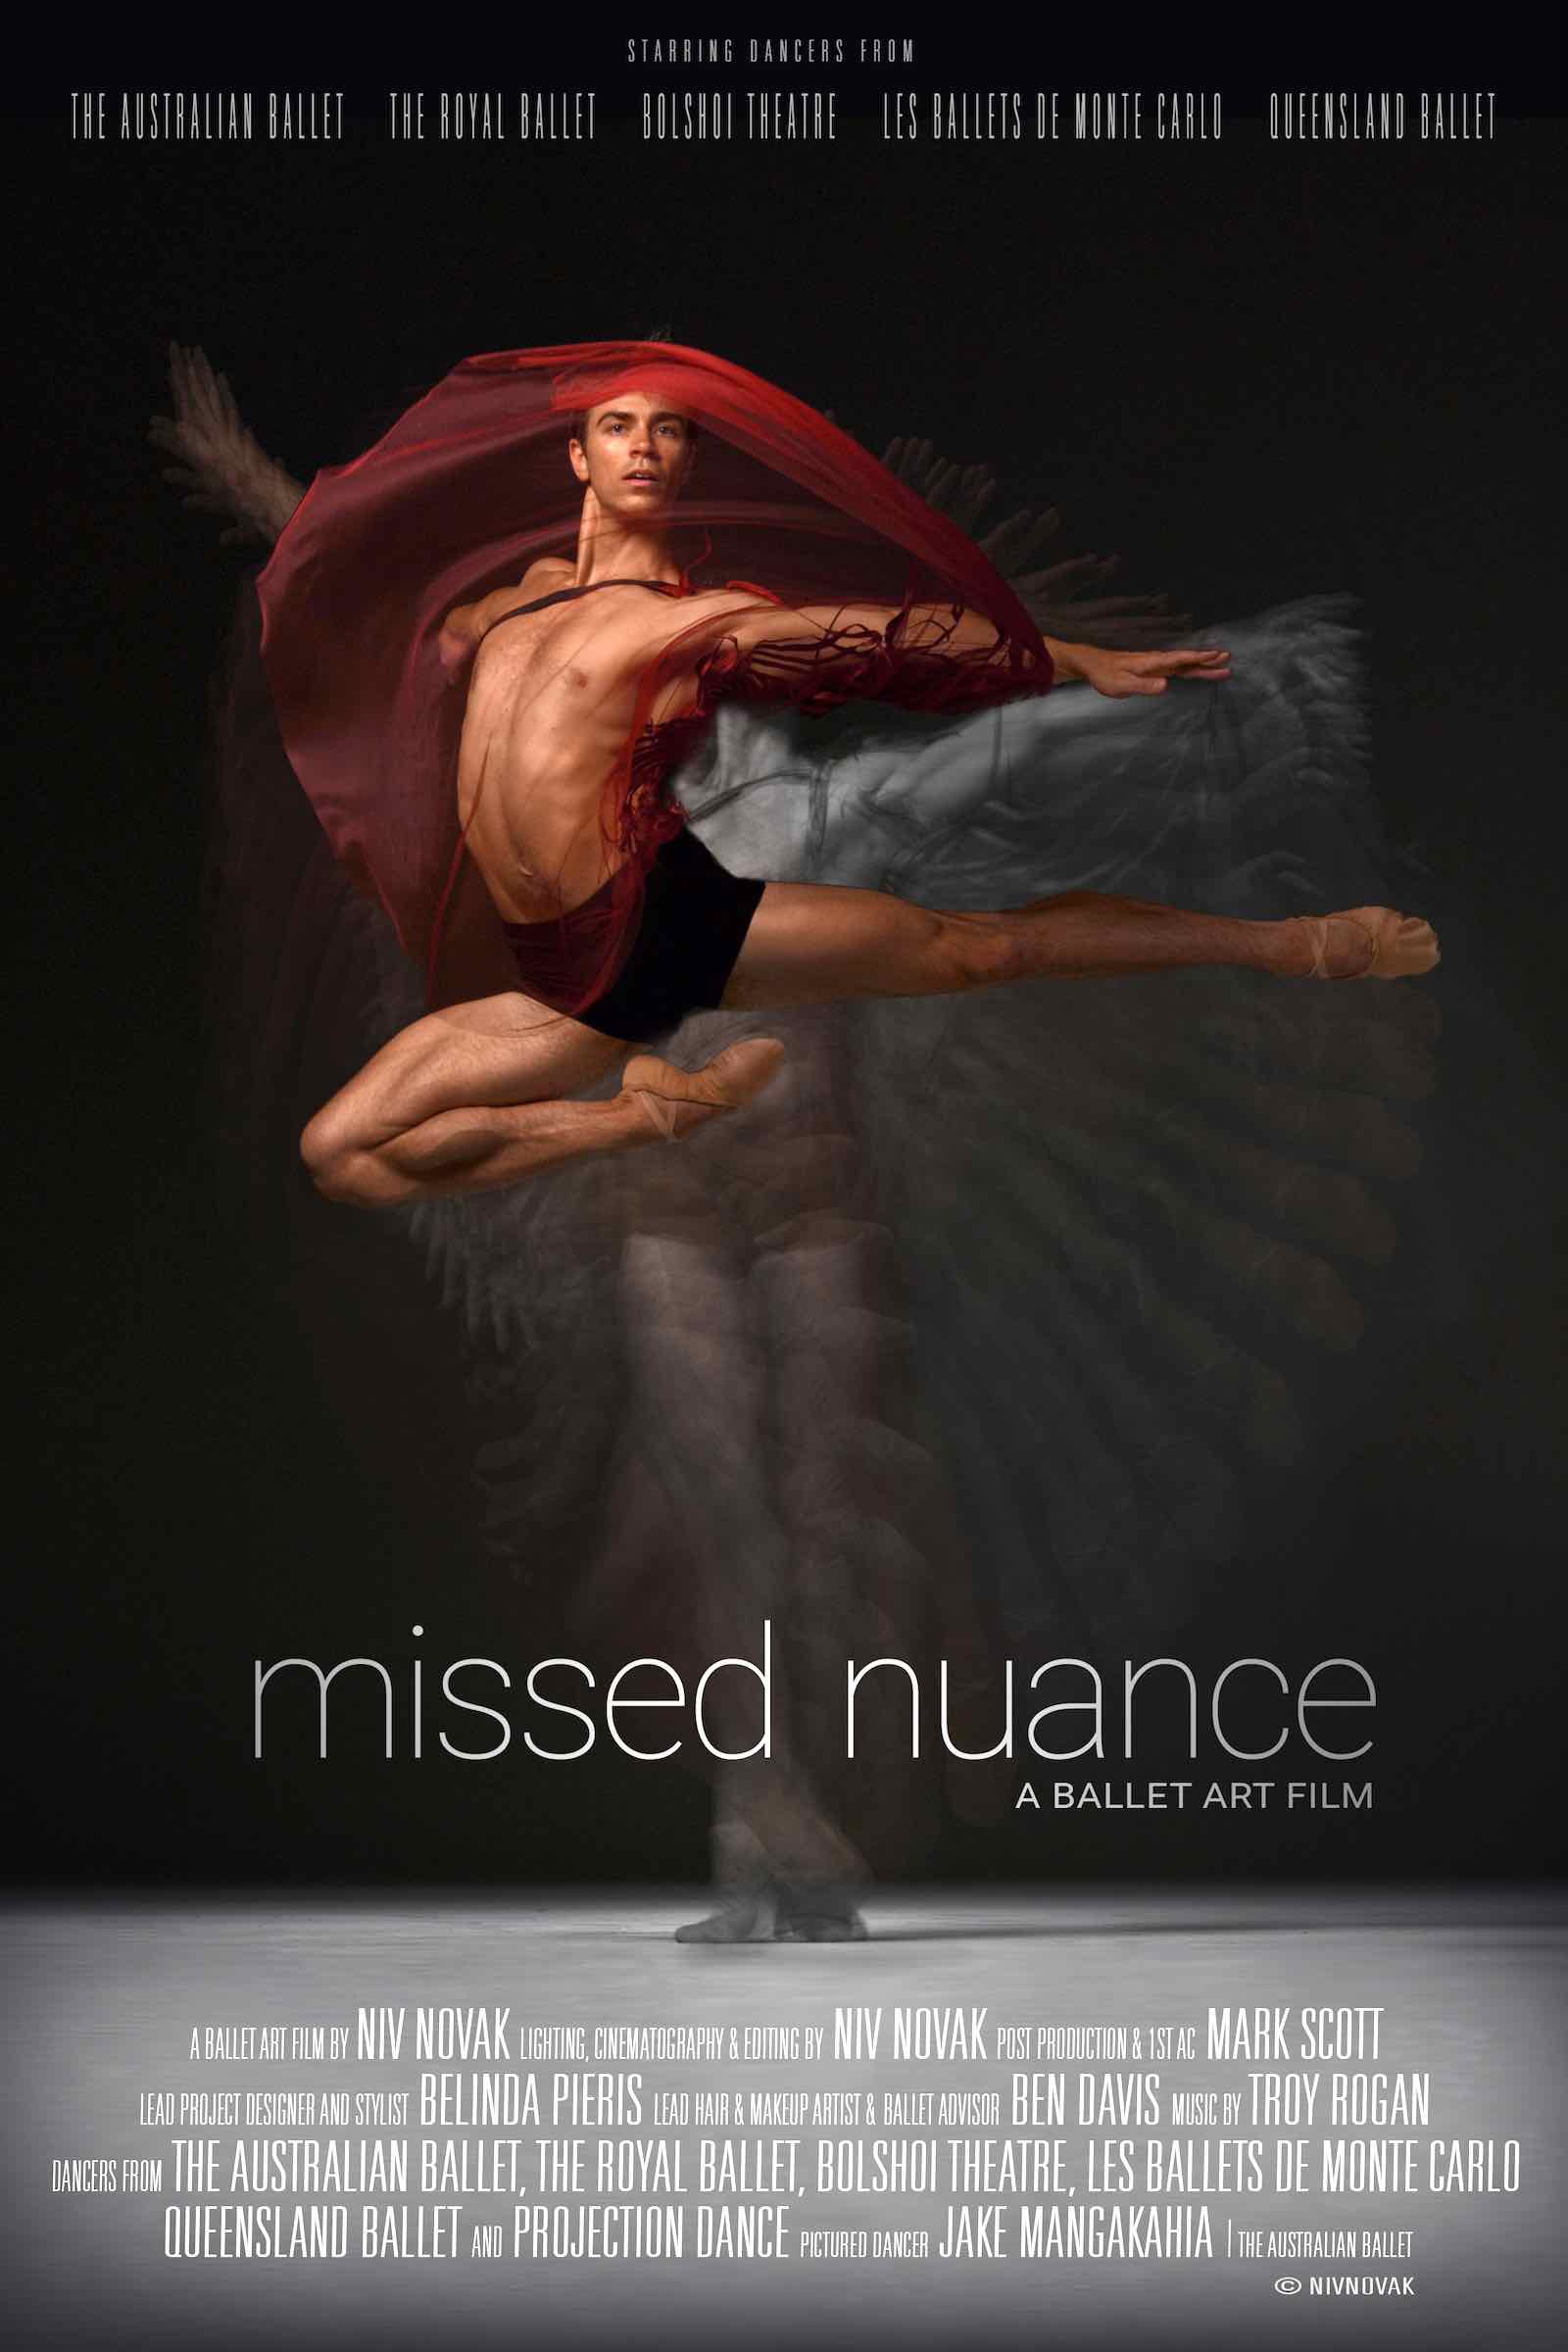 Niv Novak's 'Missed Nuance' is a breathtaking study of movement and fabric, and the role fashion plays in elevating the artistry of dance.